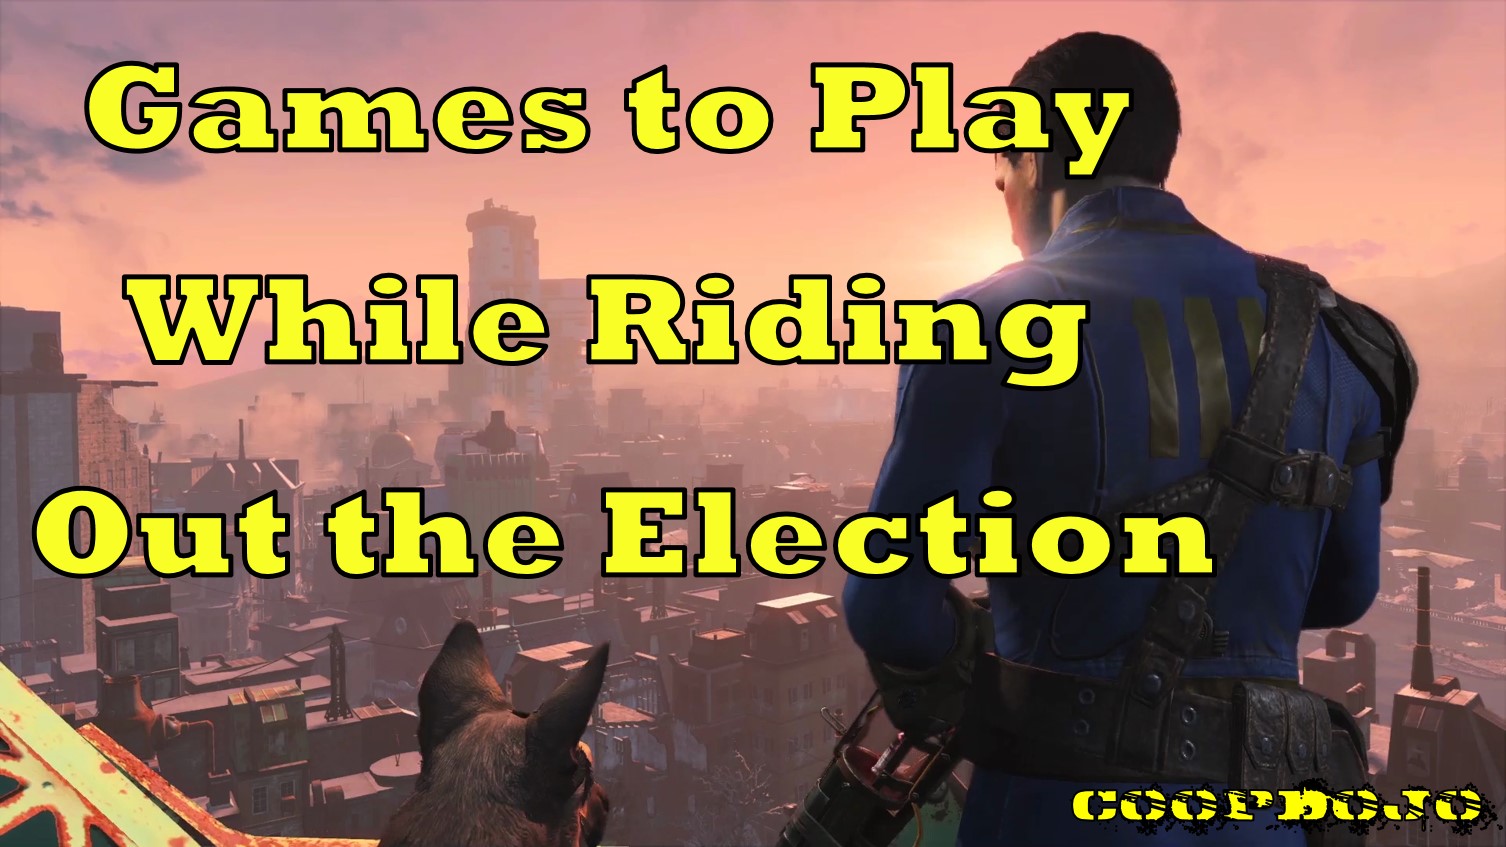 Games To Play To Ride Out The Election